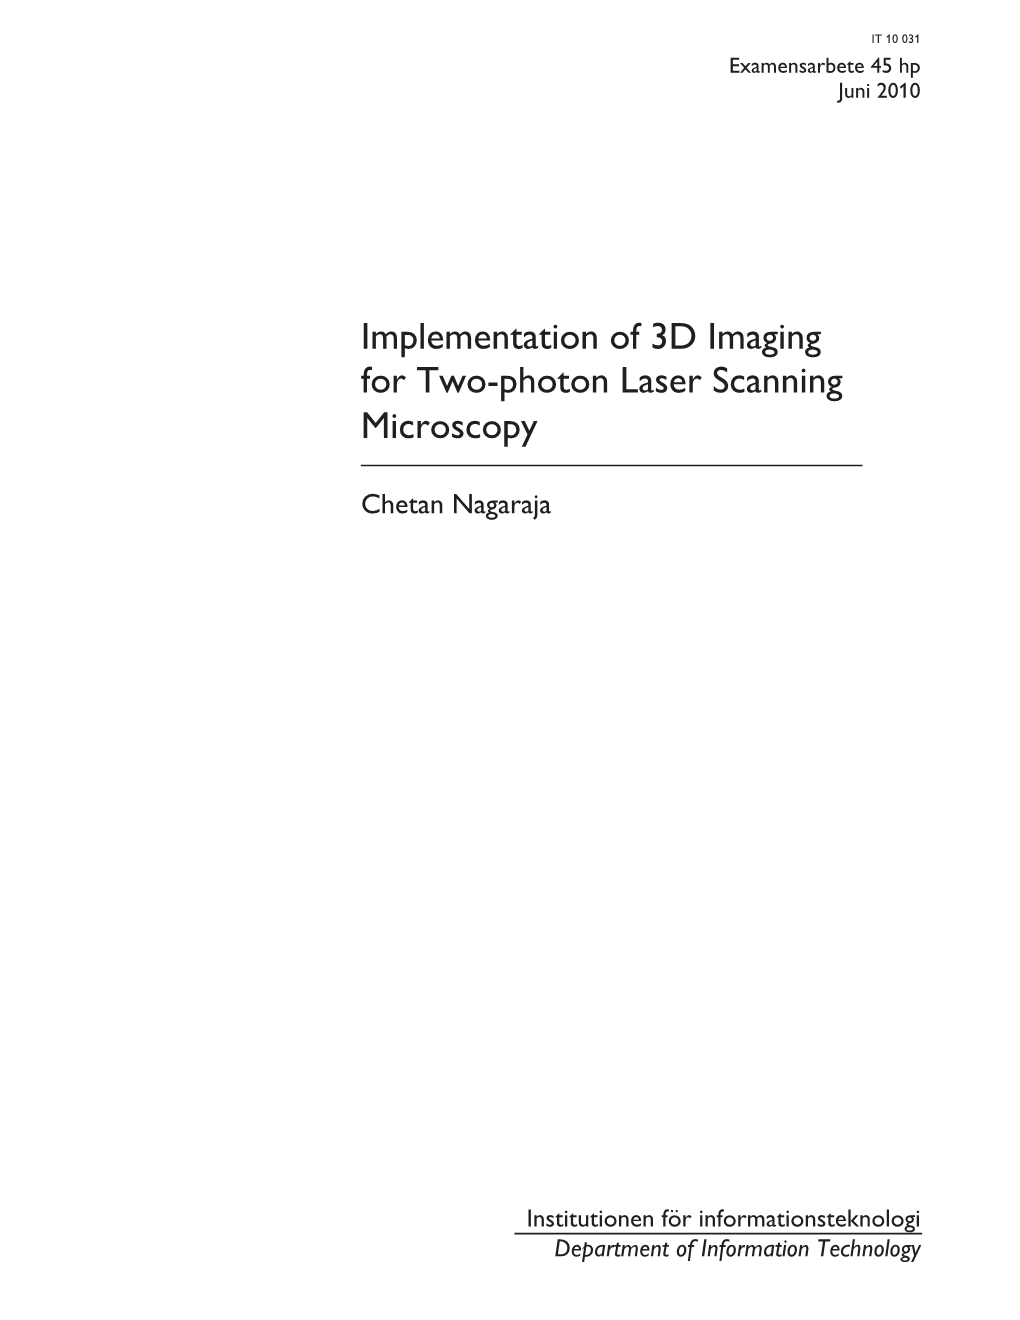 Implementation of 3D Imaging for Two-Photon Laser Scanning Microscopy